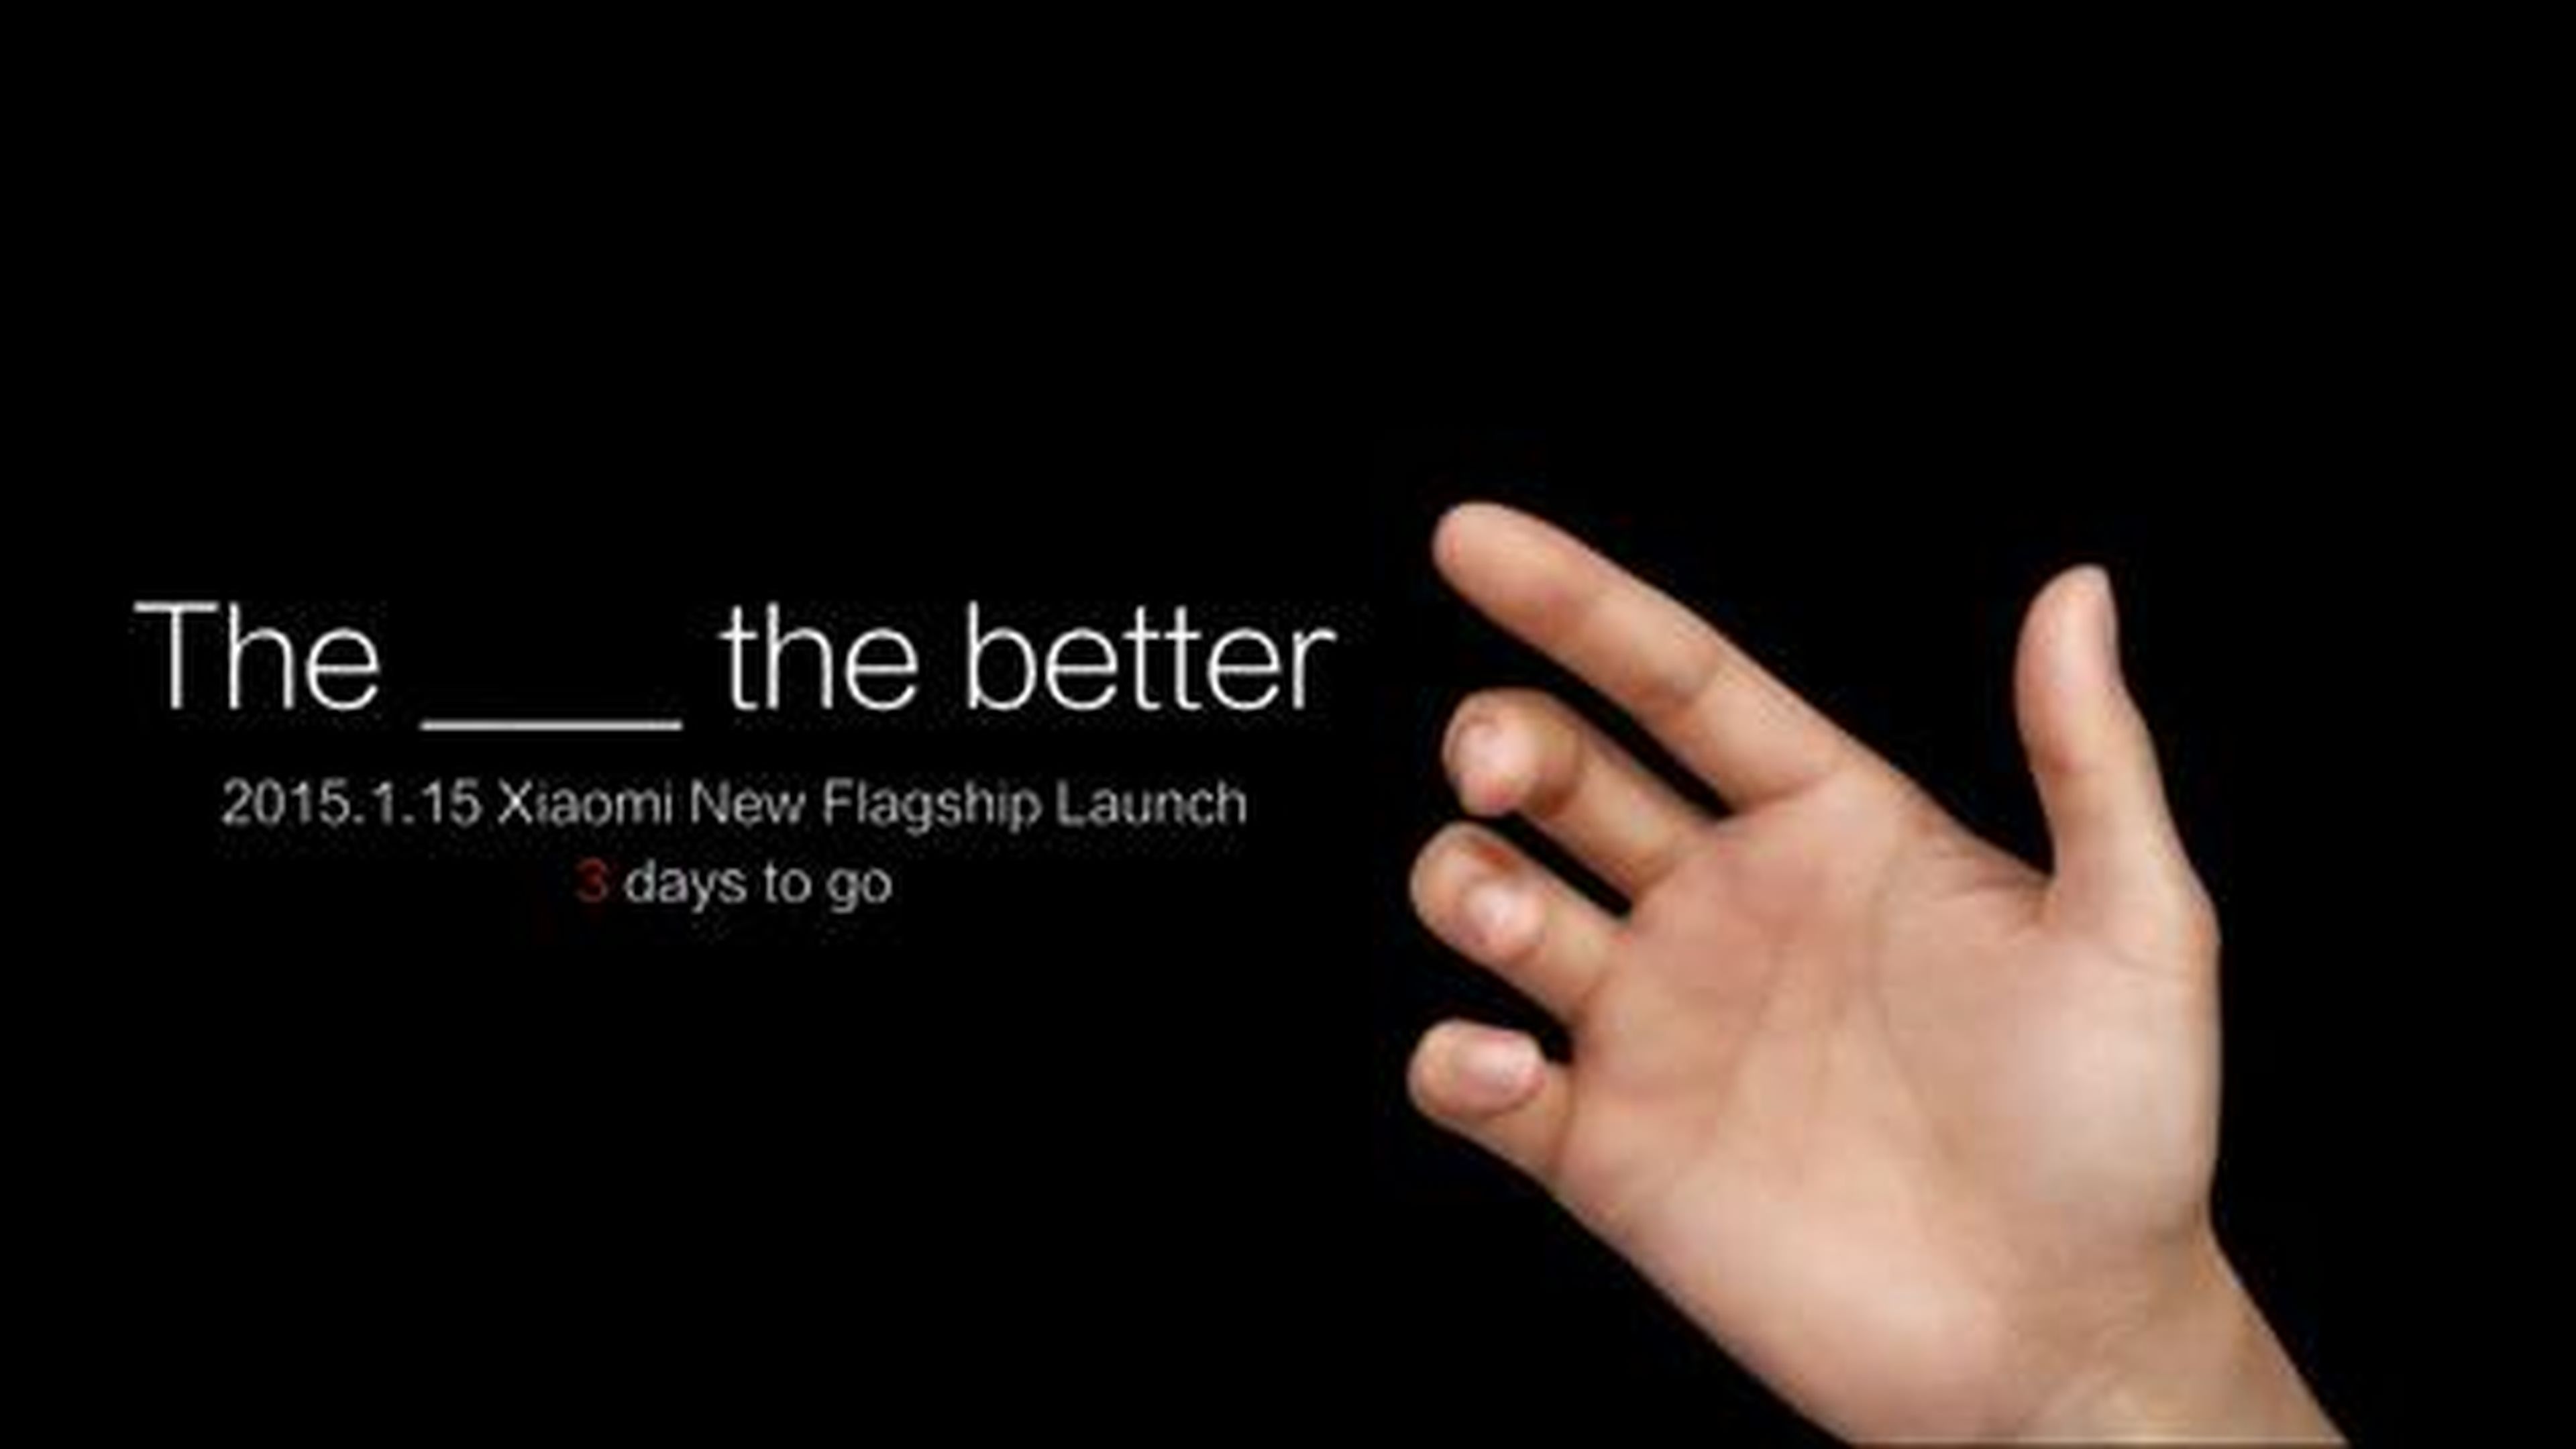 Xiaomi New Flagship Launch on 15, Jan. 2015- Guess what it is-